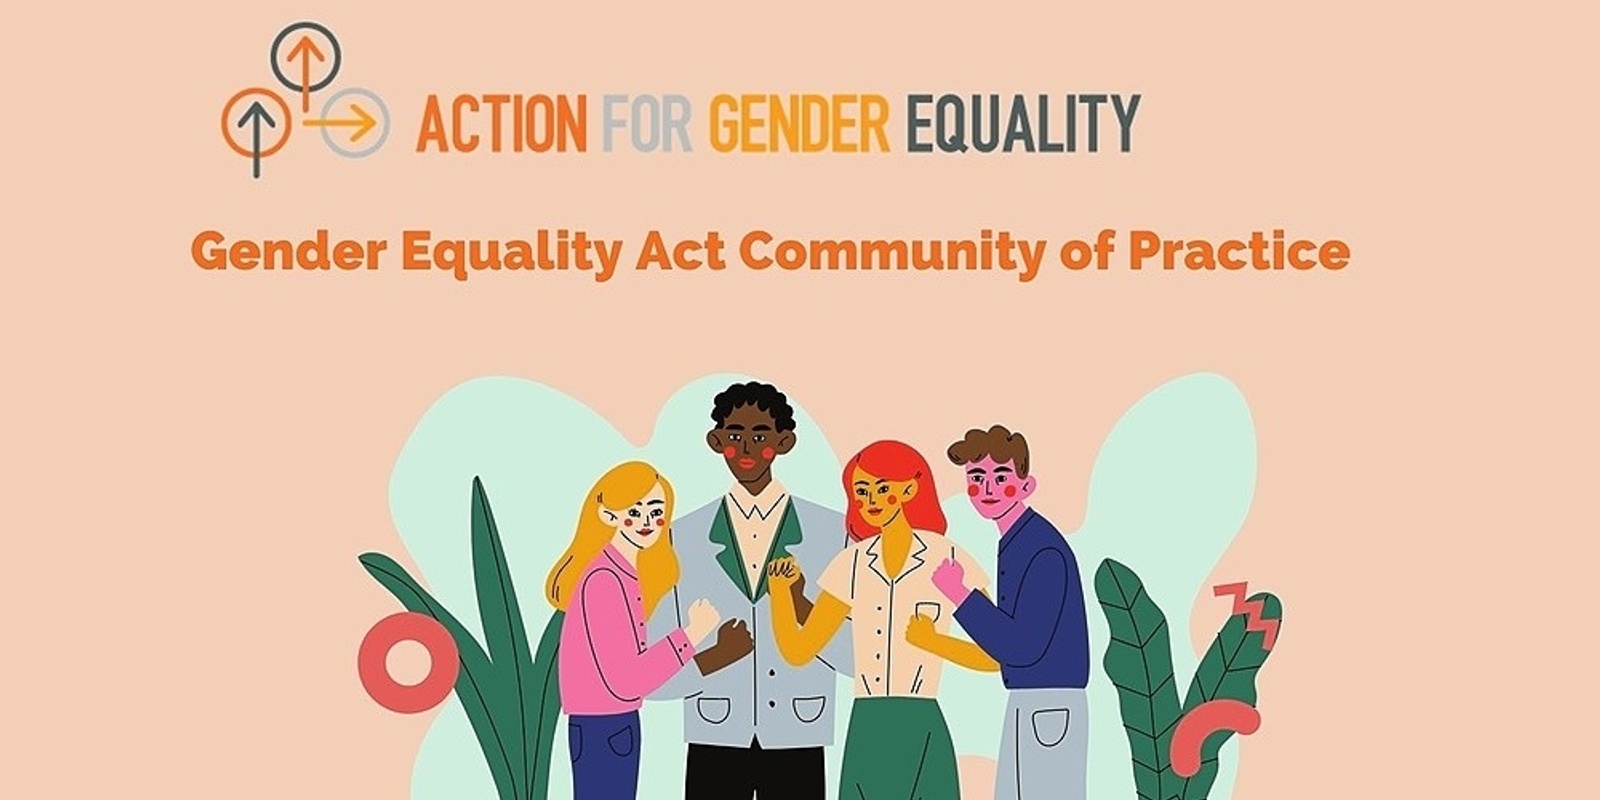 Banner image for Sport and Recreation Gender Equality Act Community of Practice #4